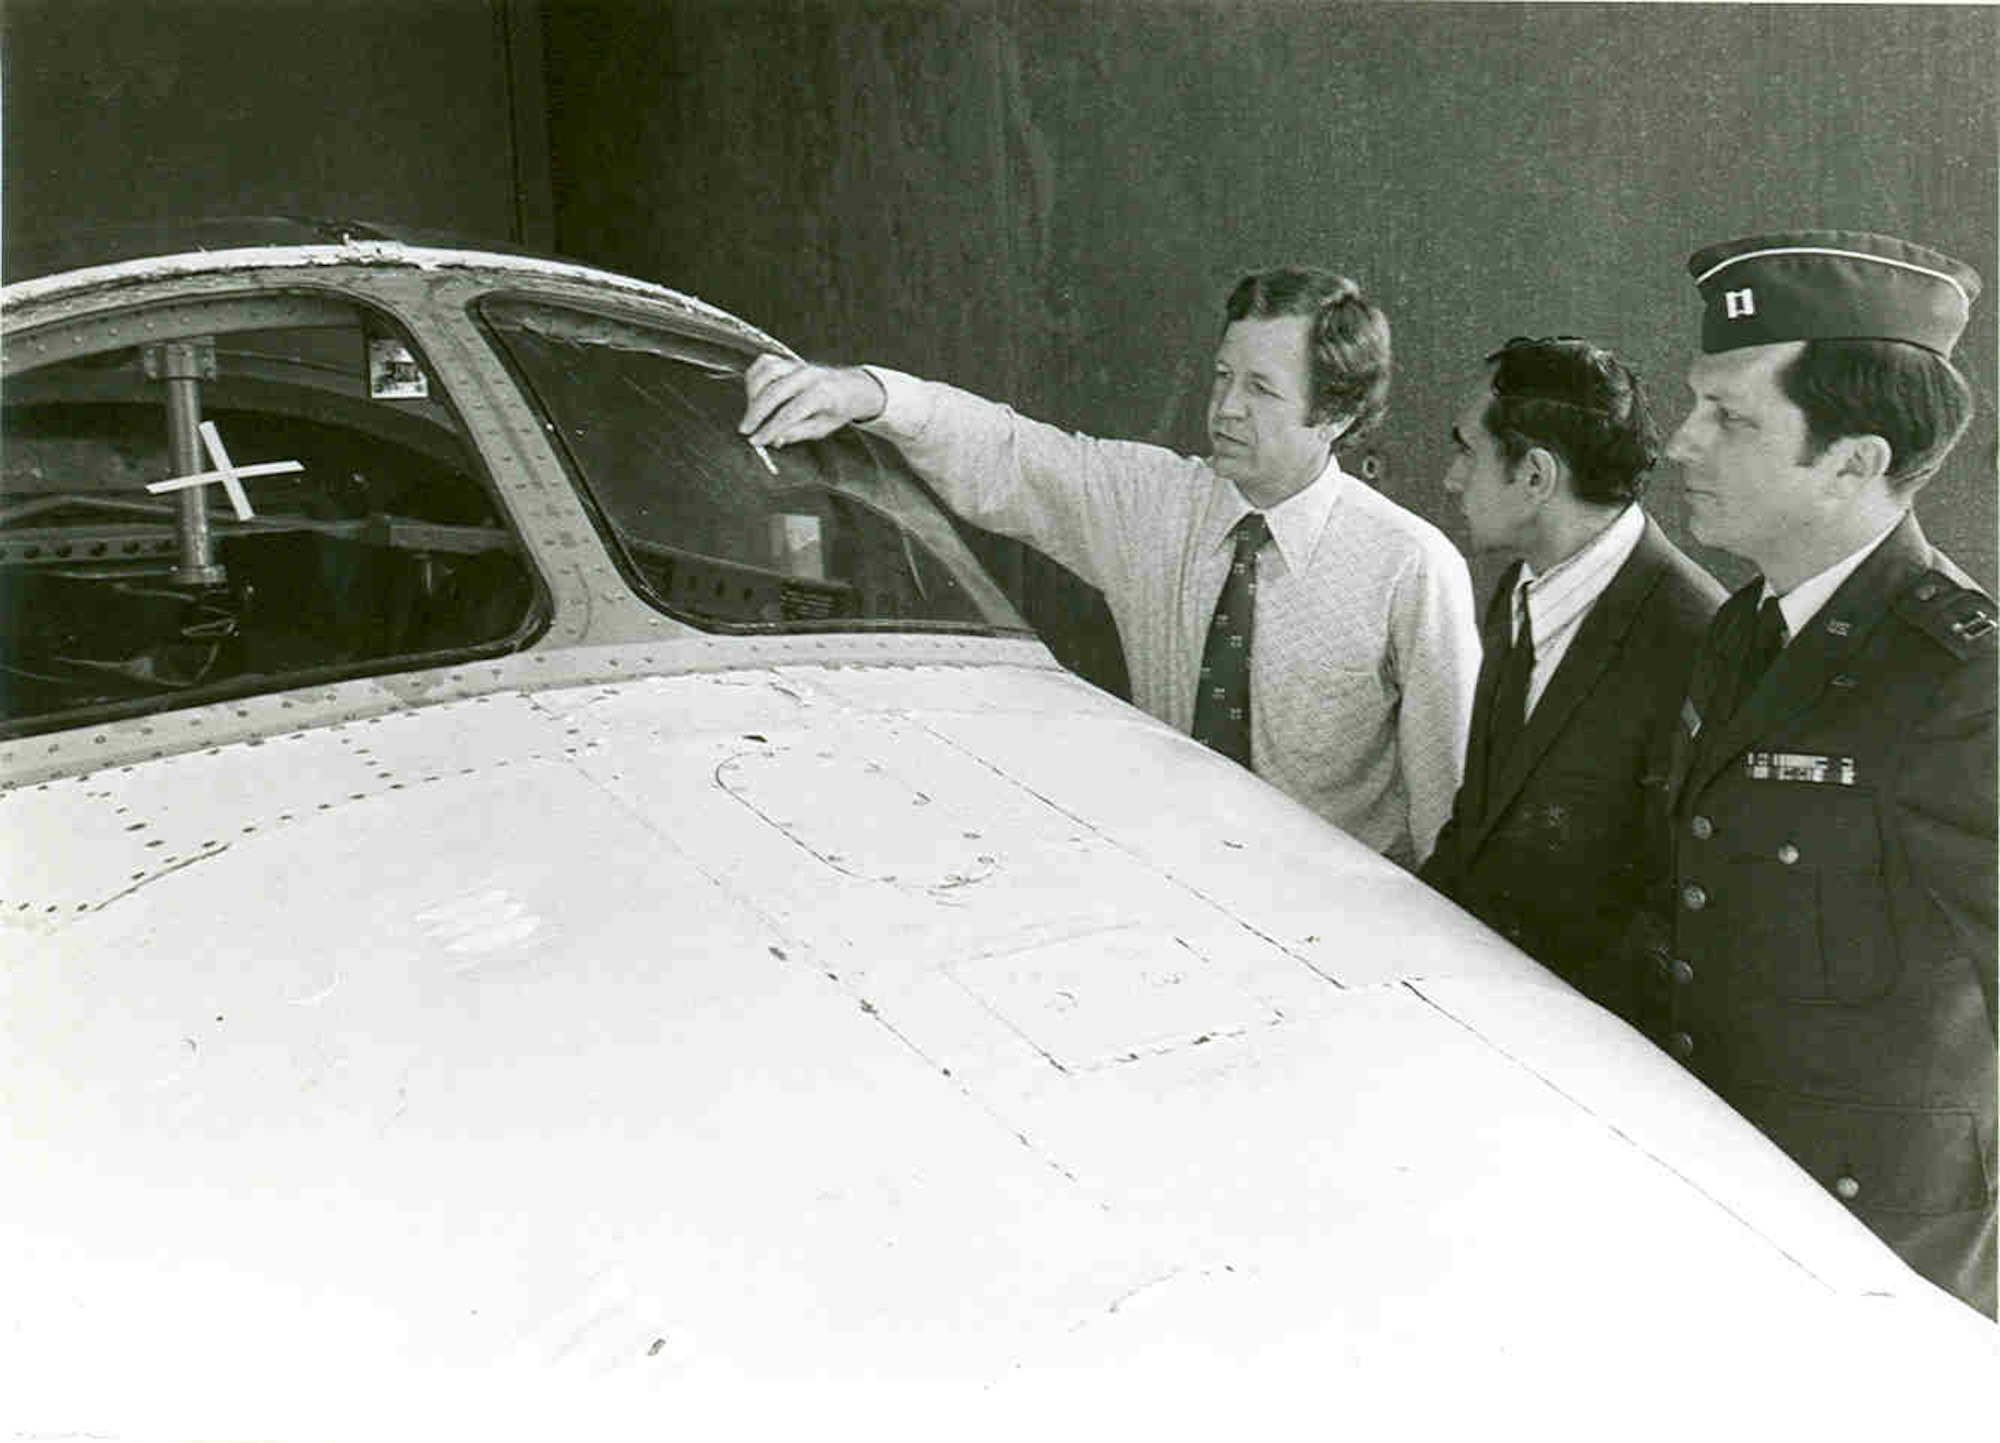 Then-project manager Gene Sanders, Richard Peterson and Capt. D.C. Chapin, from left, look at the windshield of a Cessna T-37 Tweet undergoing bird strike testing at Arnold Air Force Base, Tennessee, in 1973. These tests occurred at the Bird Impact Range. This facility, more famously known as the “Chicken Gun,” was used to simulate in-flight bird strikes to aircraft canopies and other materials by launching chicken carcasses at test articles. The first shot from the Chicken Gun was fired 50 years ago. (U.S. Air Force photo)